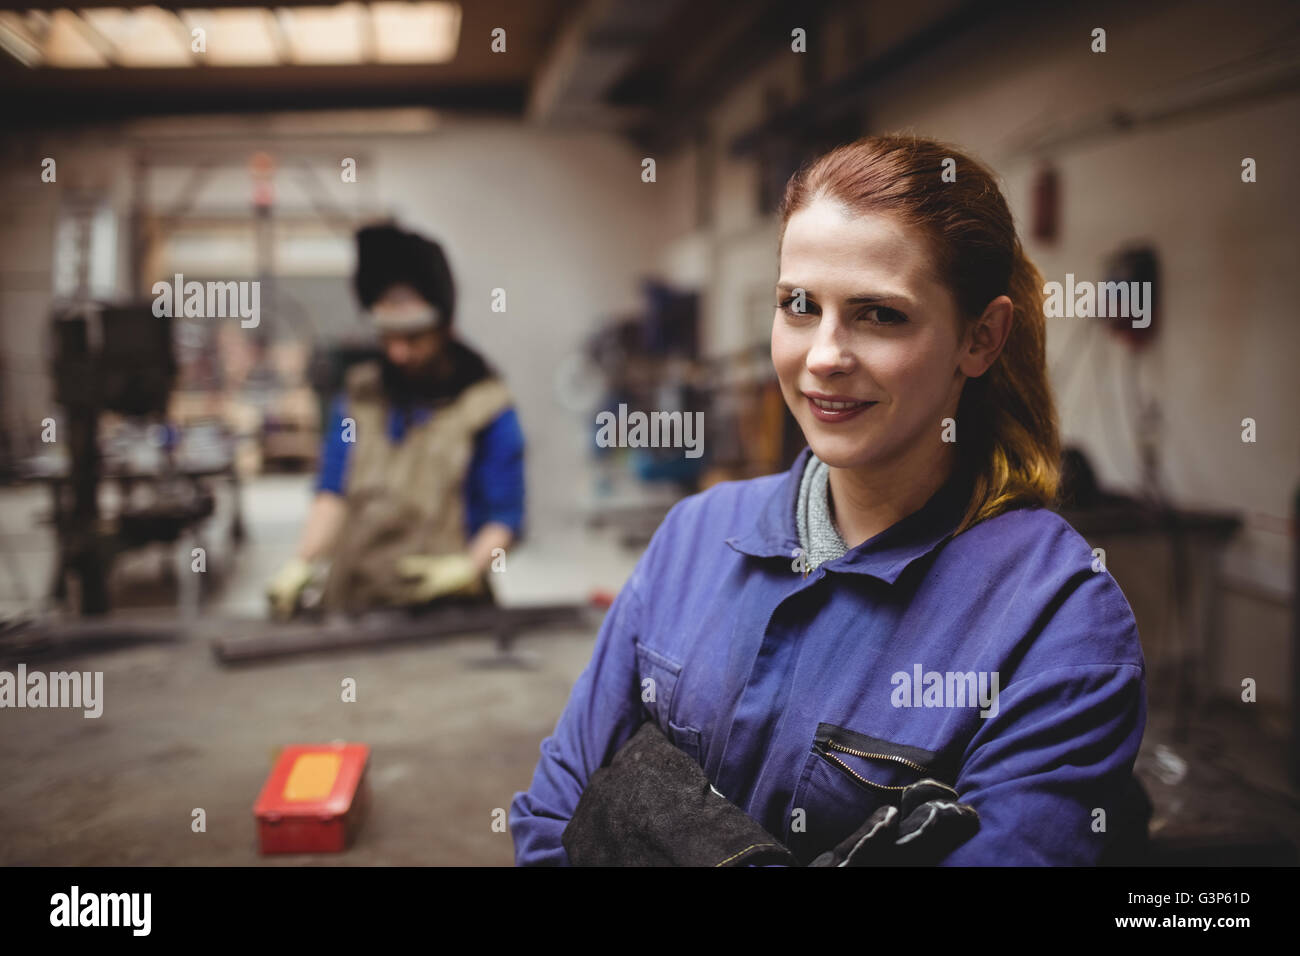 Female welder in protective workwear with colleagues Stock Photo